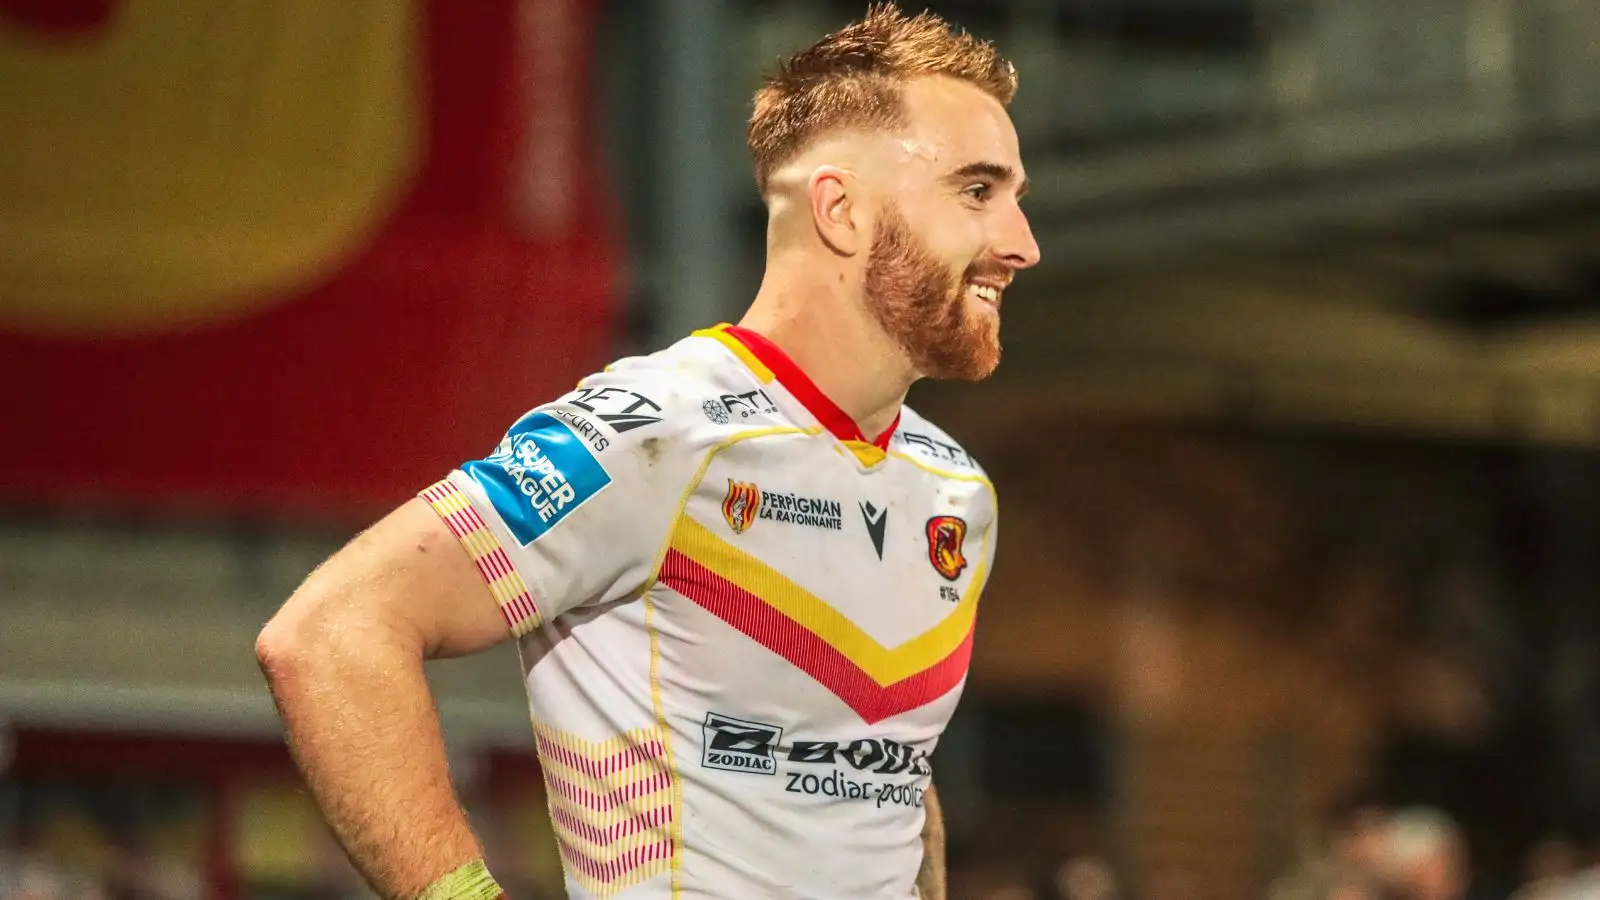 “I don’t agree” – Catalans awarded controversial penalty try against Warrington